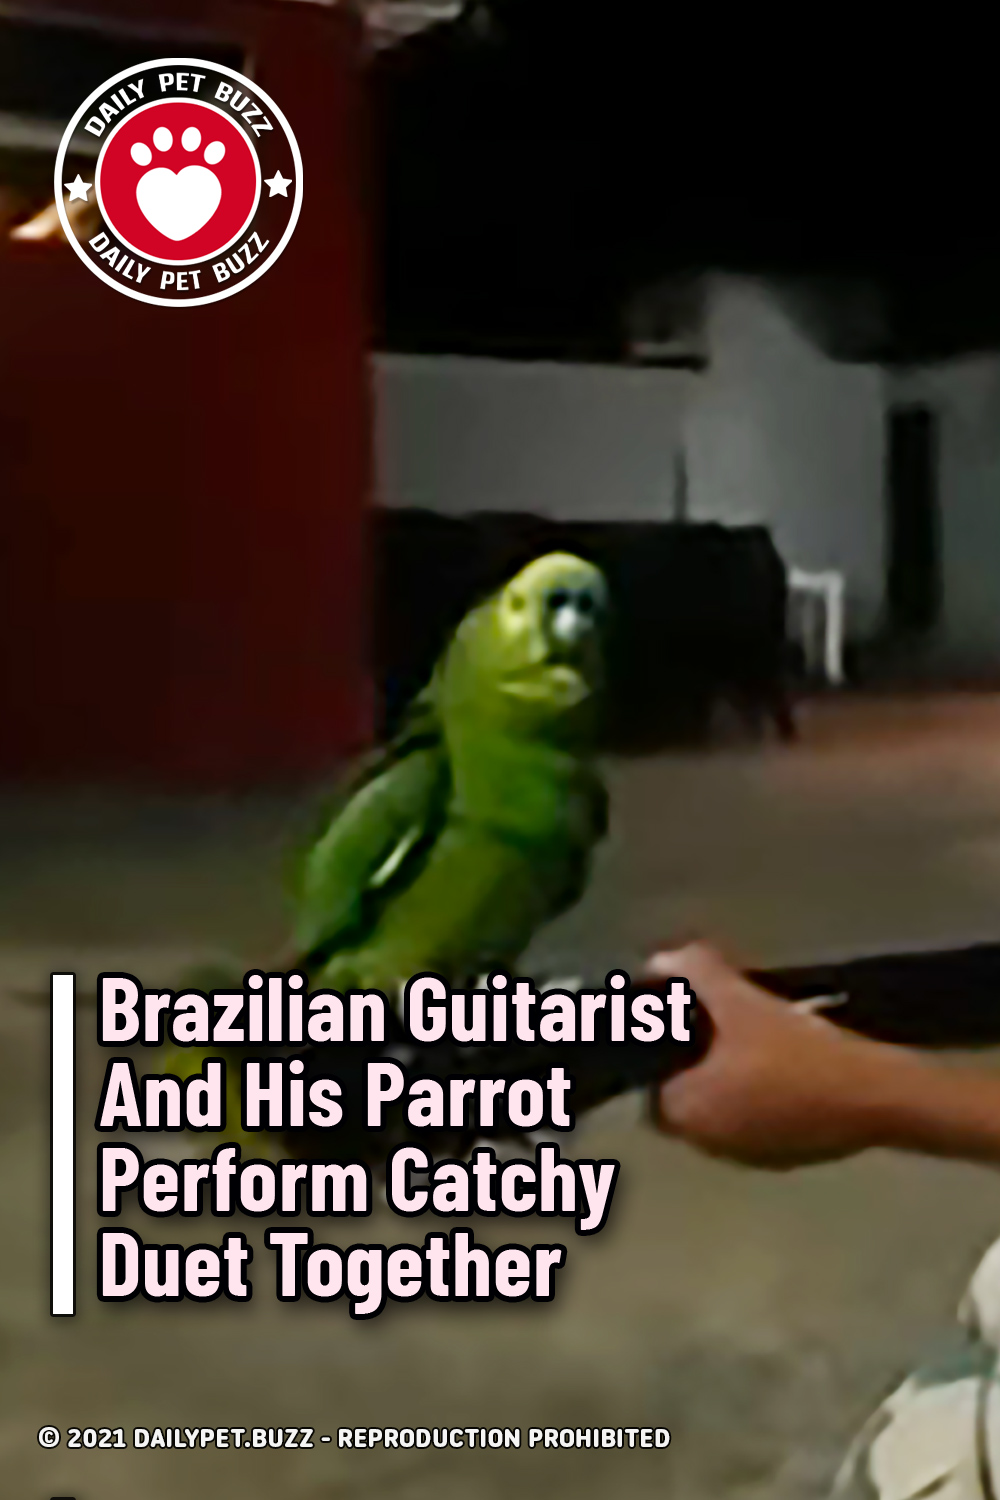 Brazilian Guitarist And His Parrot Perform Catchy Duet Together